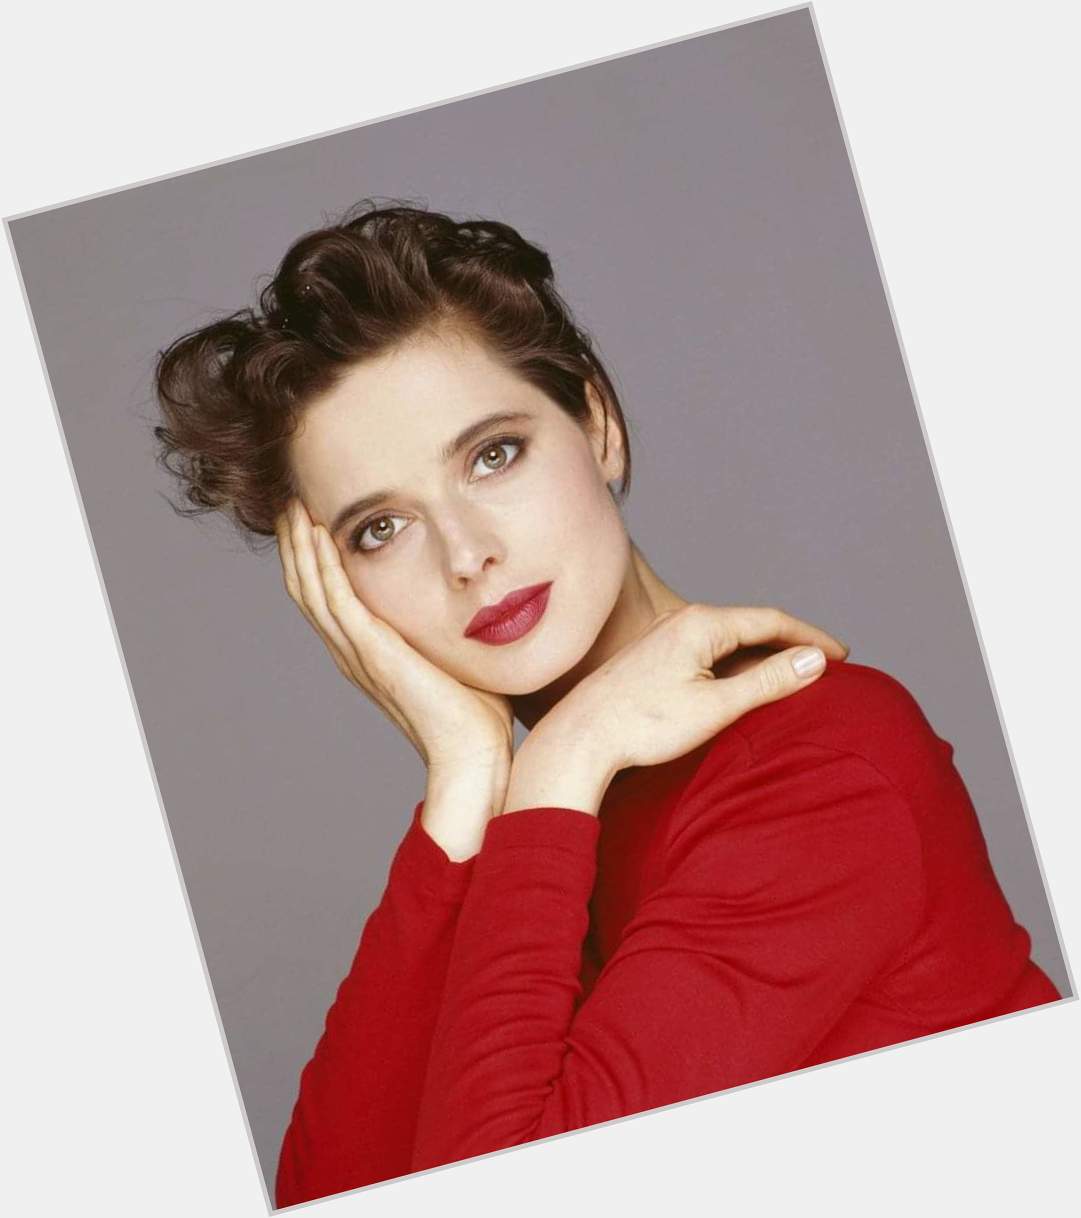 Happy Birthday to Isabella Rossellini who turns 70 today 